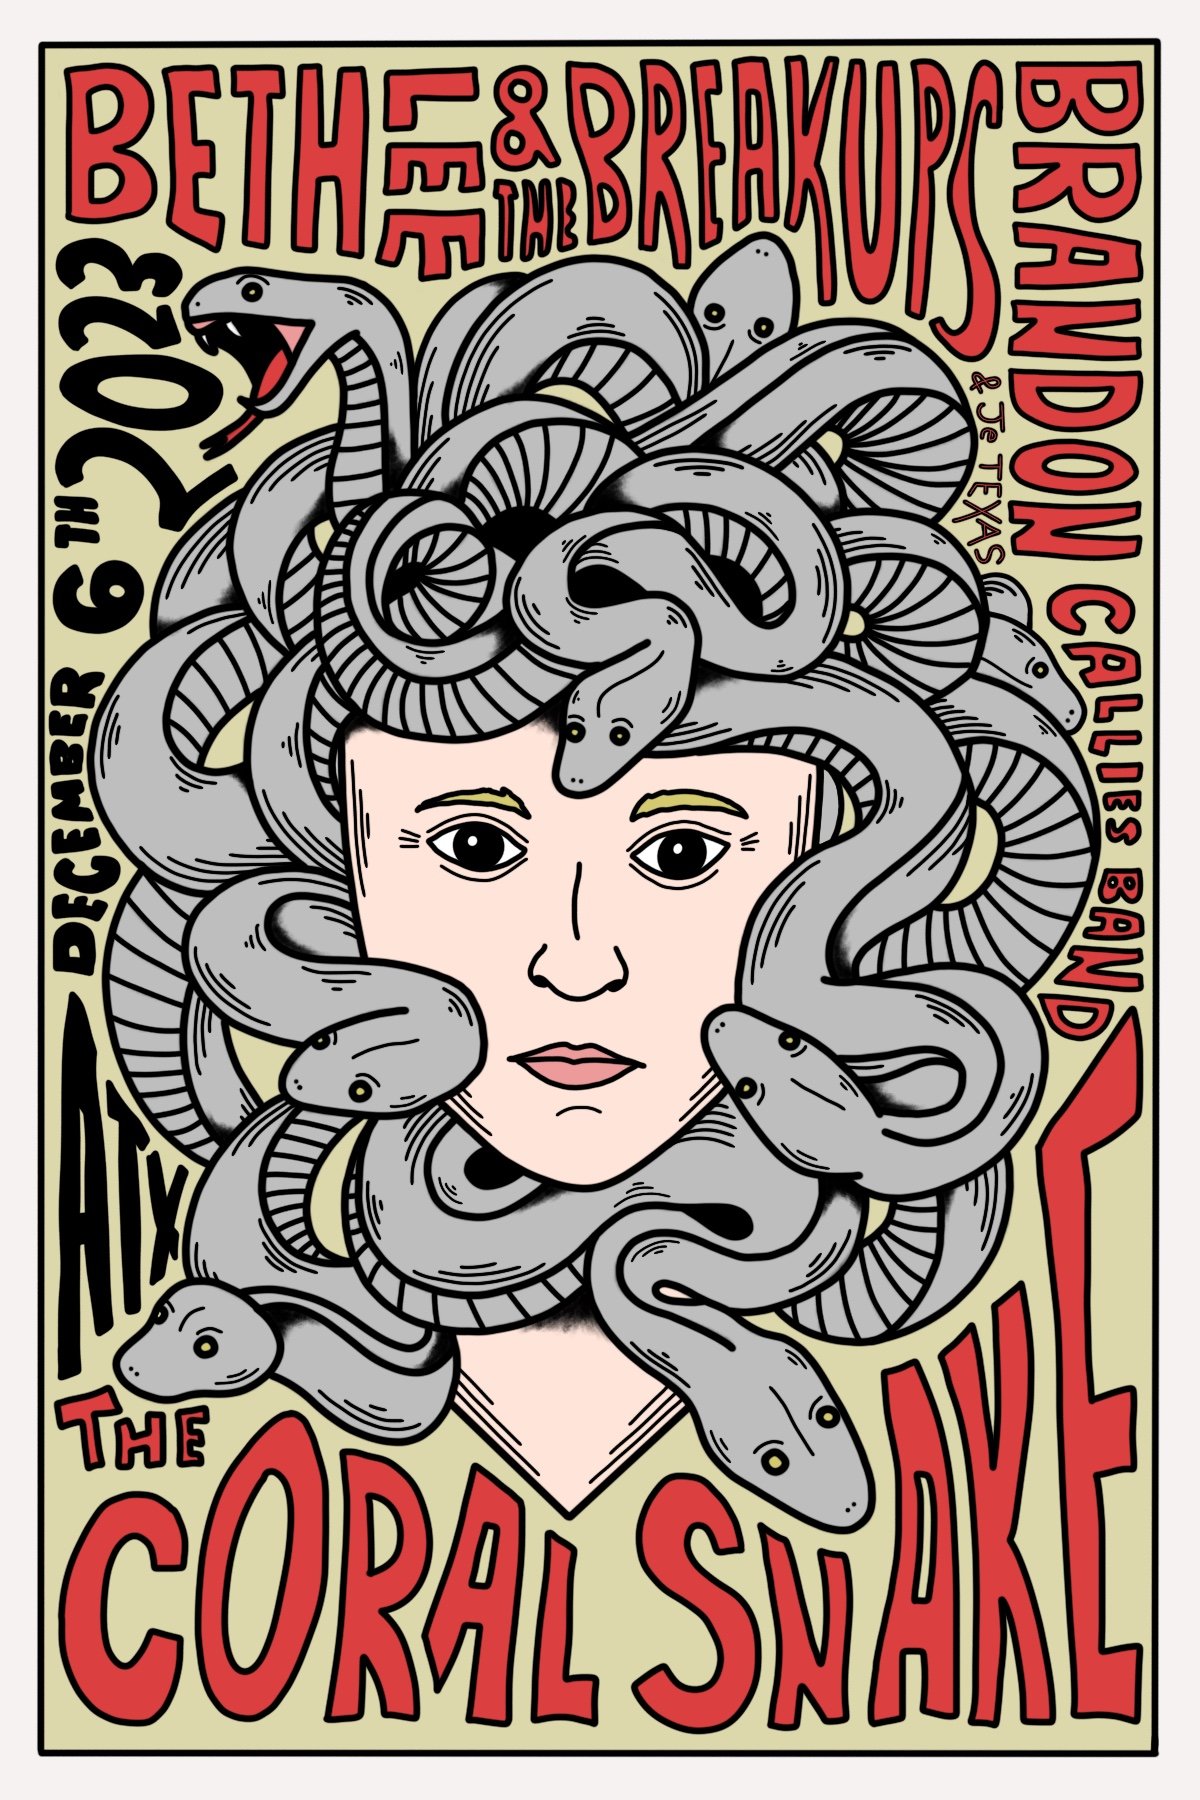 The Coral Snake "Show Poster" ATX